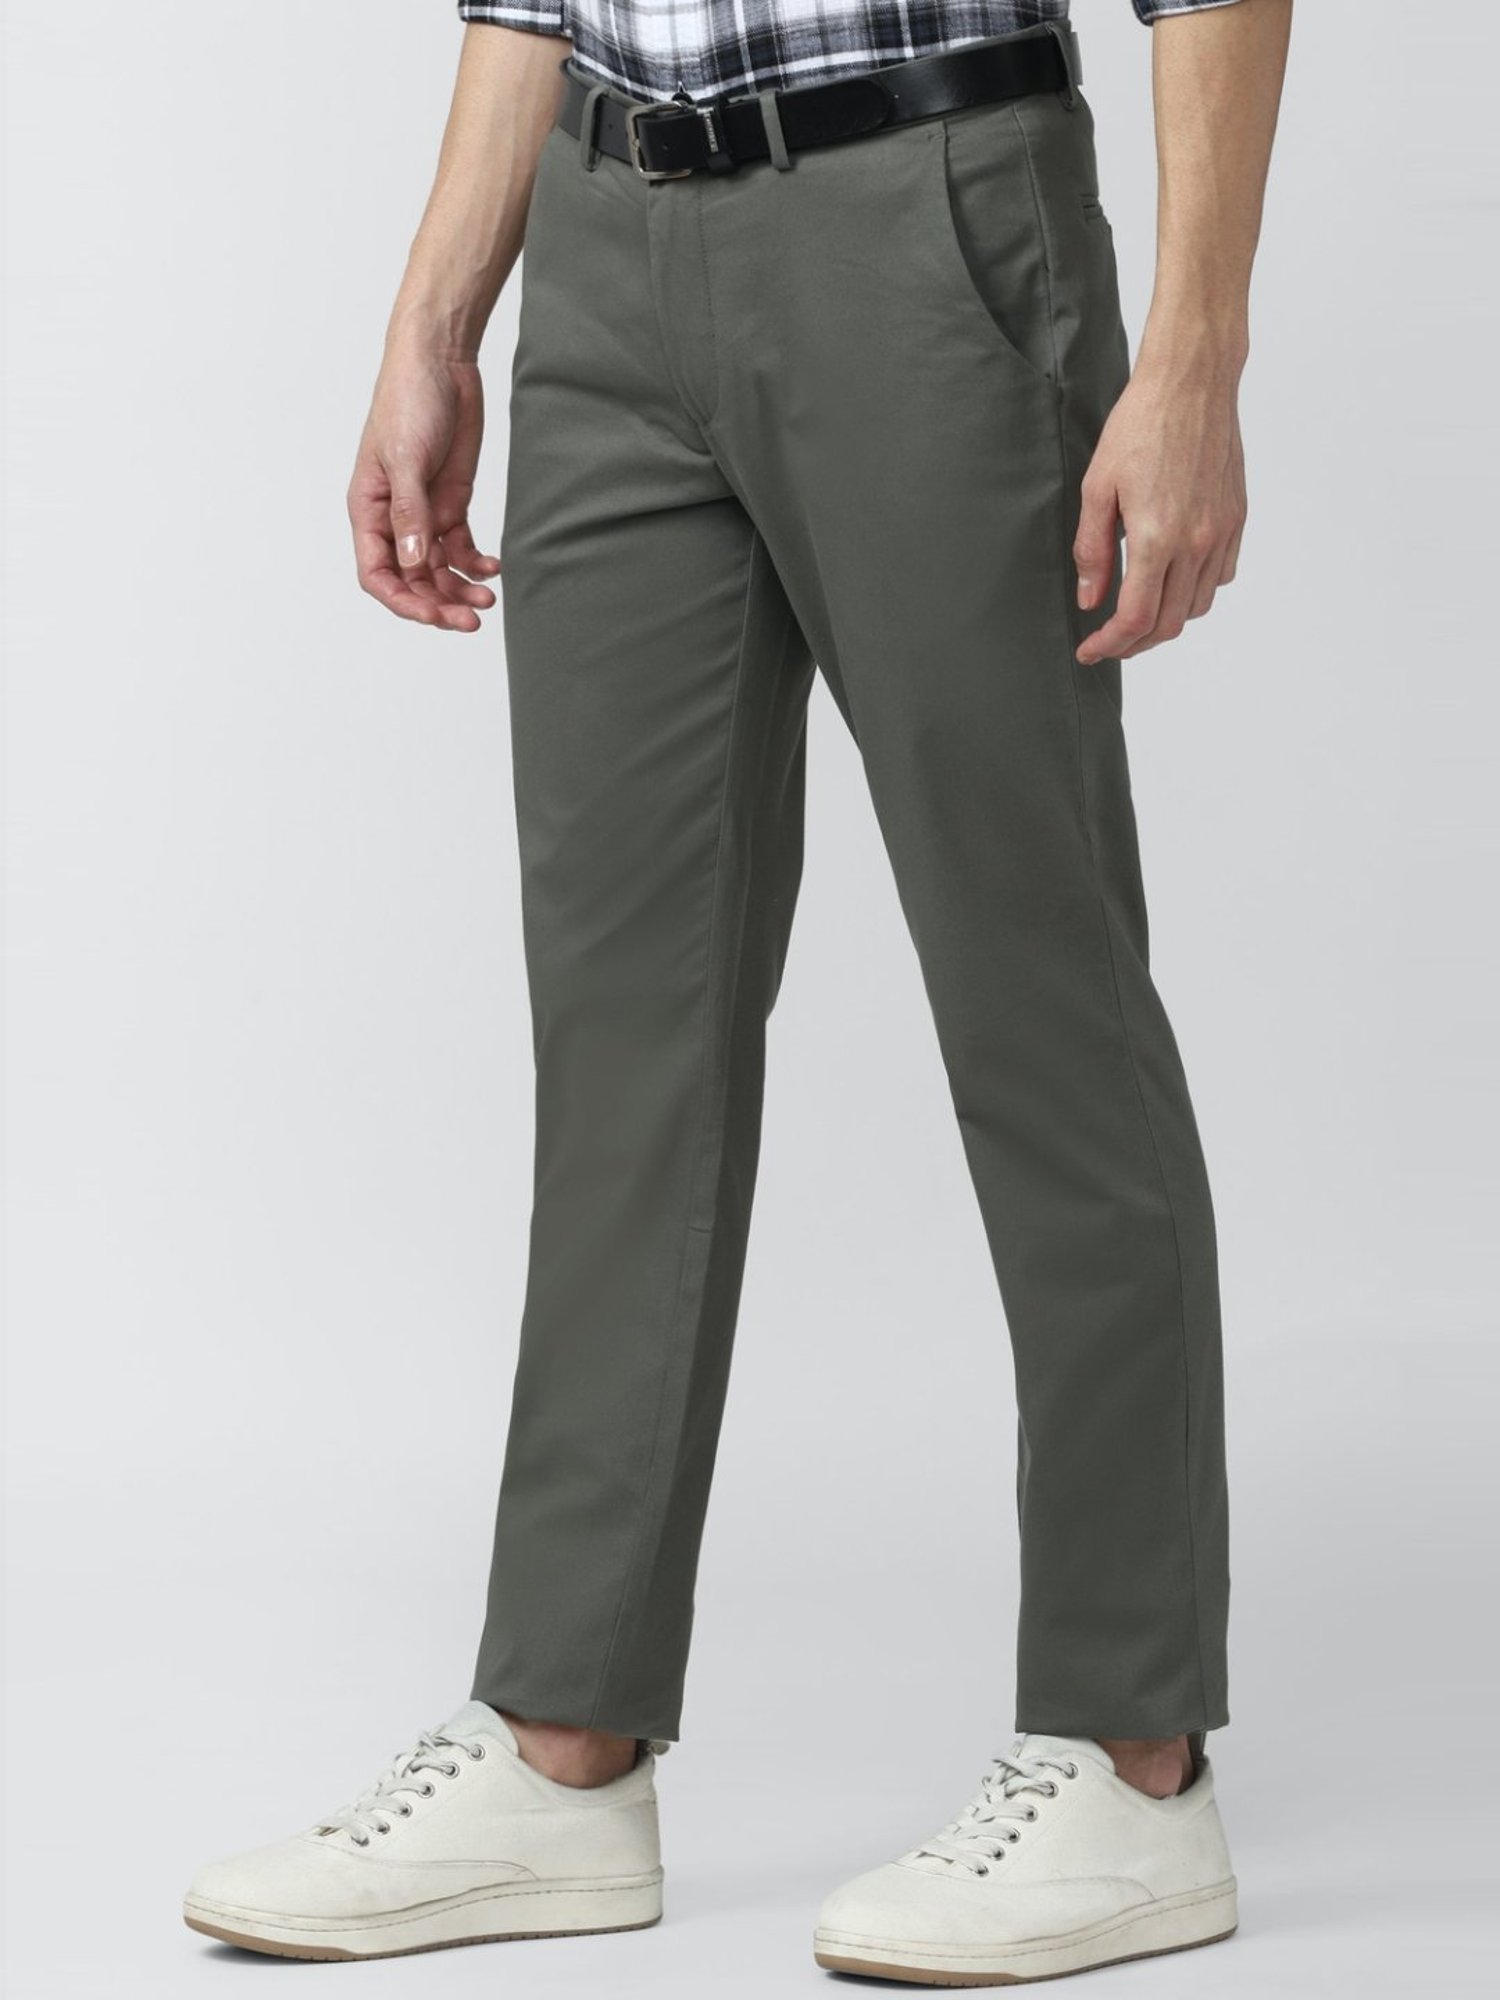 Buy Peter England Grey Cotton Slim Fit Trousers for Mens Online @ Tata CLiQ